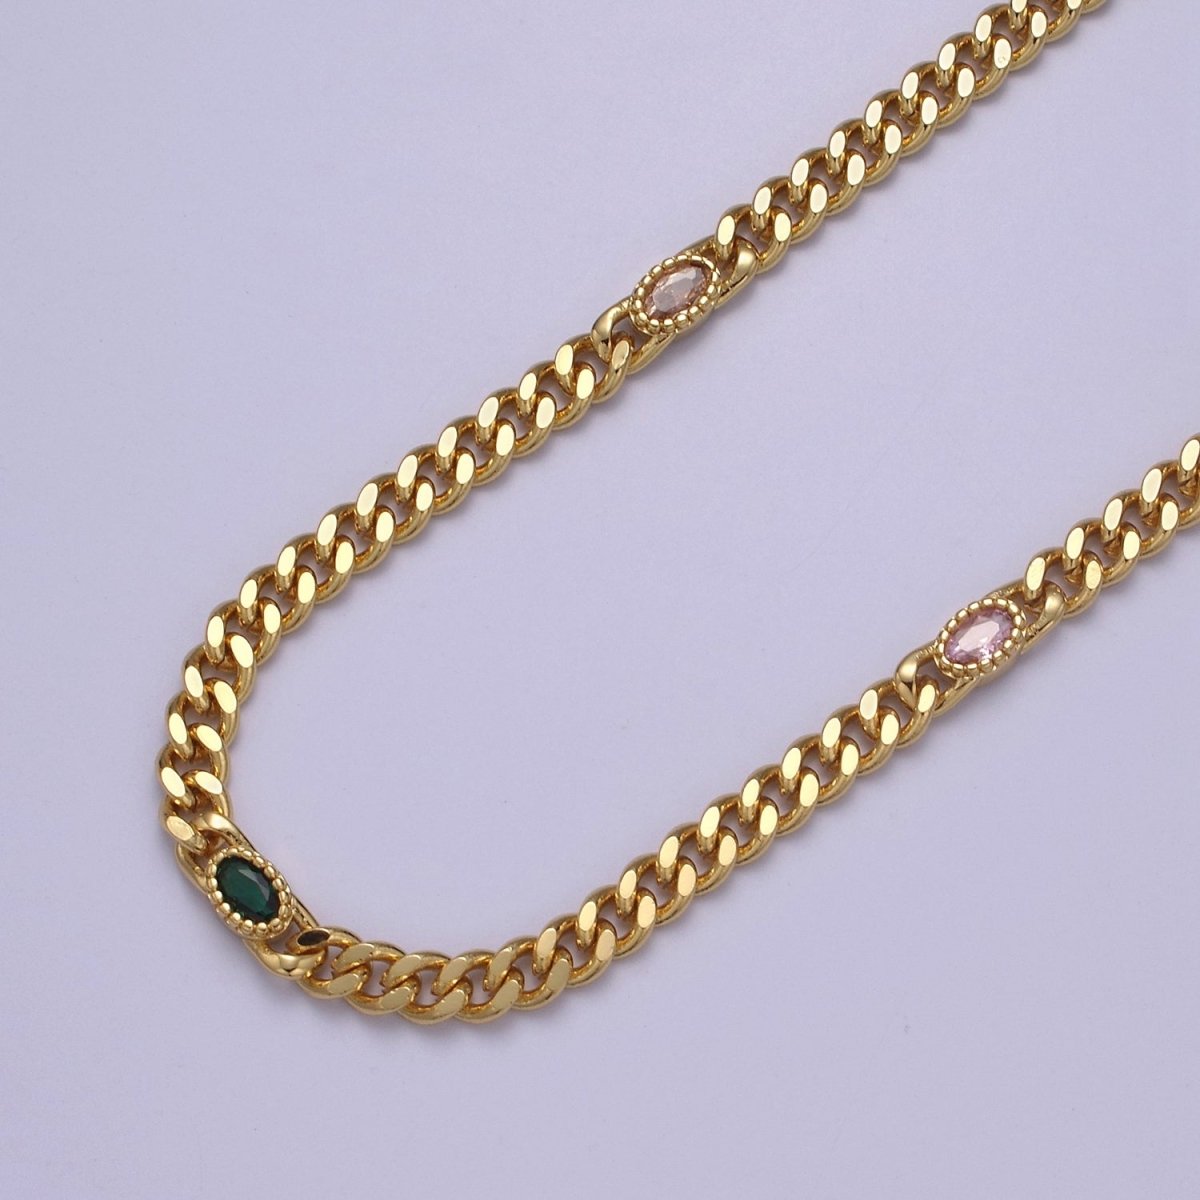 24K Gold Filled Flat Curb Chain with Oval Crystal Cubic Zirconia CZ Connector, 4.5mm in Width Unfinished Curb Chain by Meter | O-087 ~ O-089 WA-1366 - WA-1367 Clearance Pricing - DLUXCA